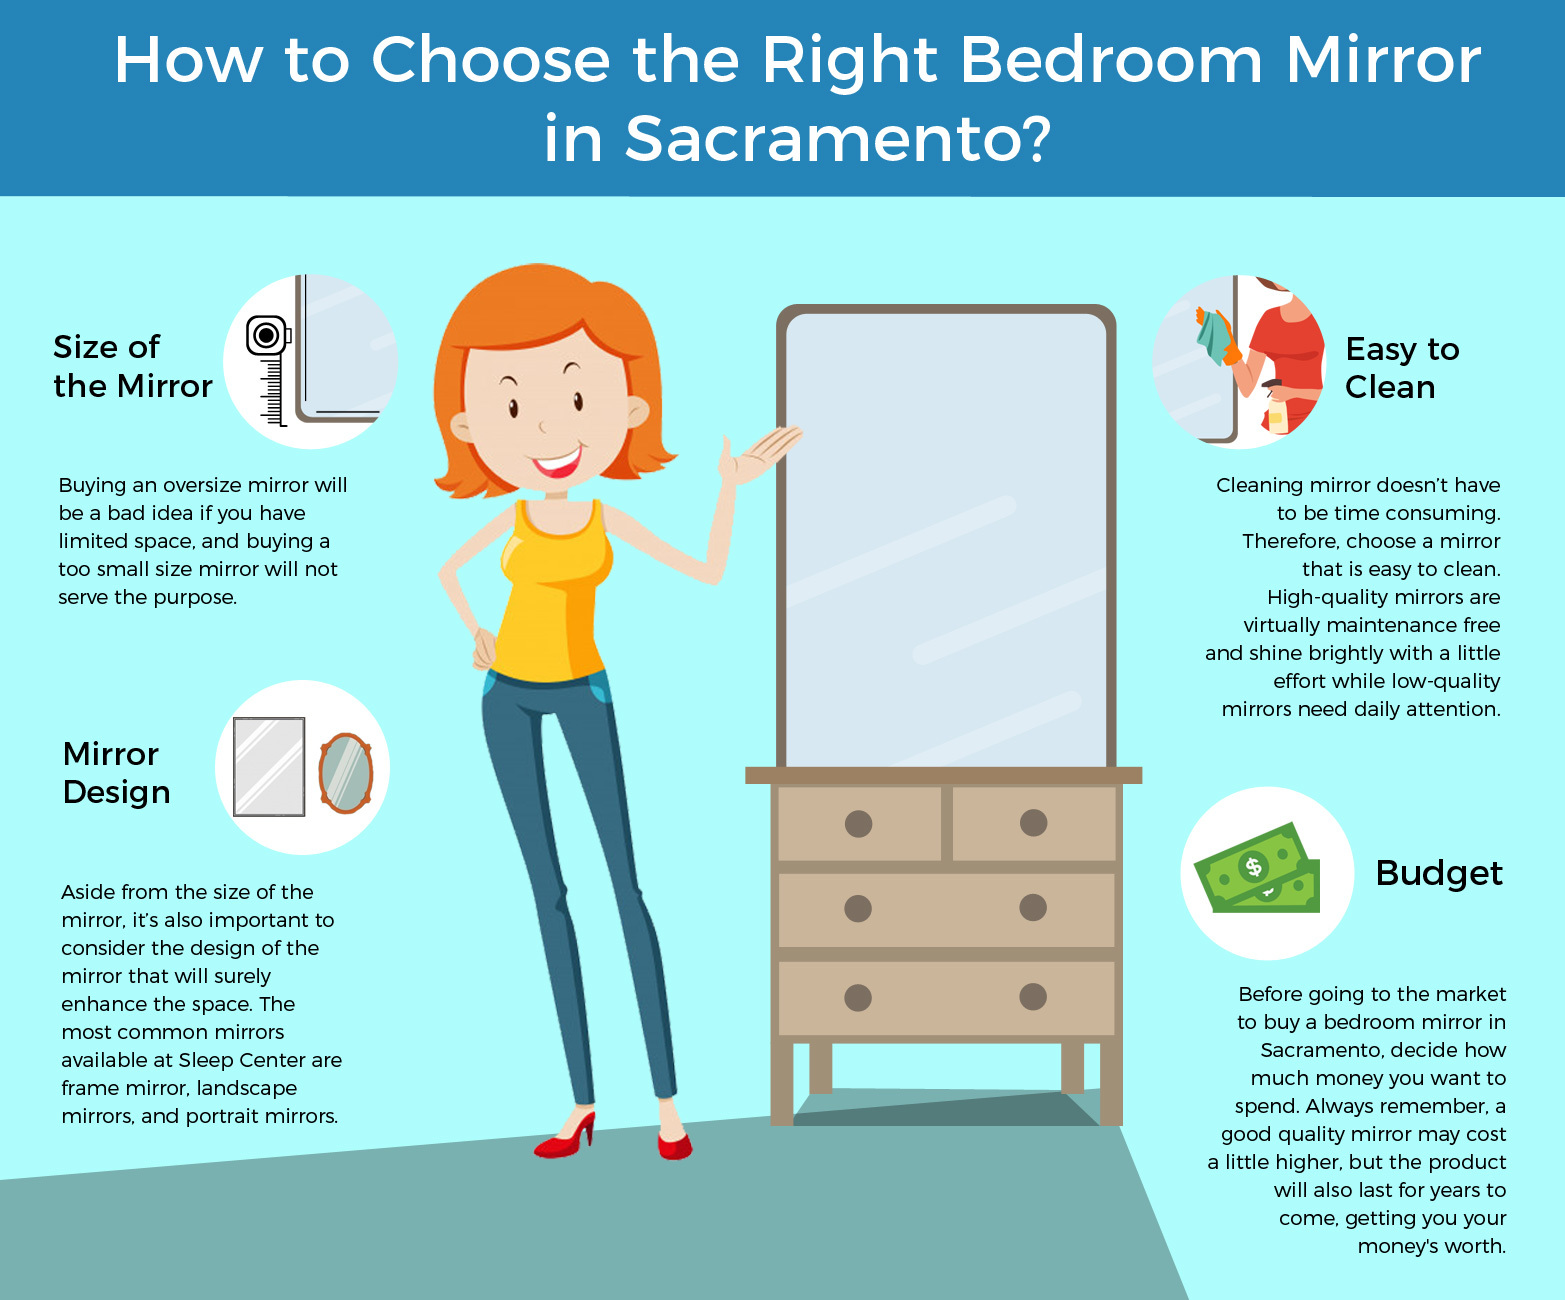 How to Choose the Right Bedroom Mirror in Sacramento?